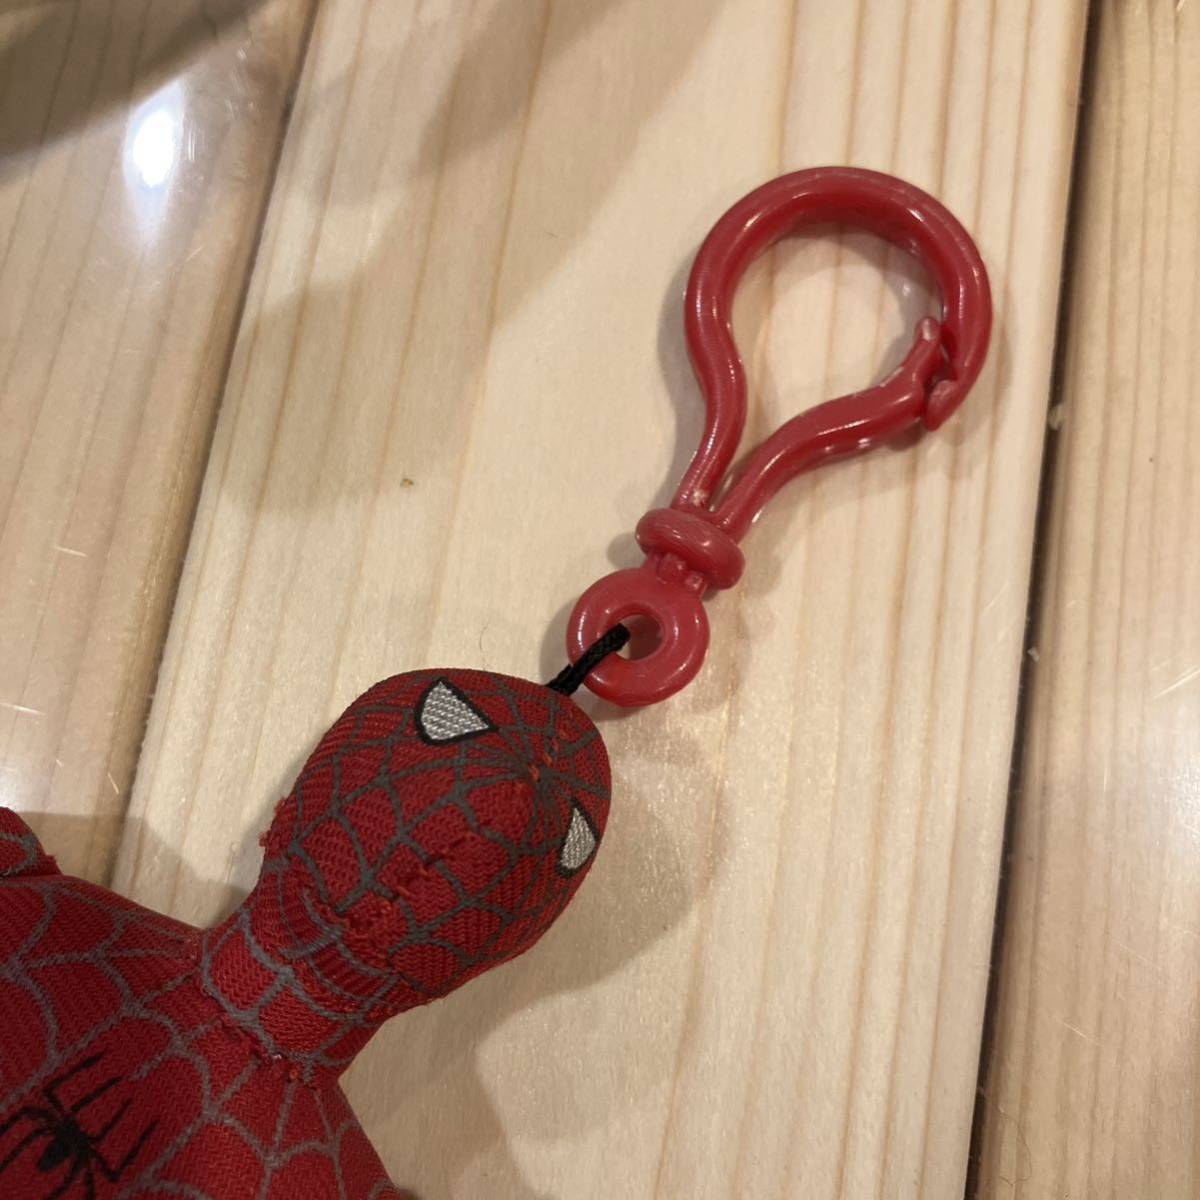  Spider-Man .. lowering soft toy 3 body suction pad omo tea figure Vintage Vintage import miscellaneous goods American Comics Ame toy 